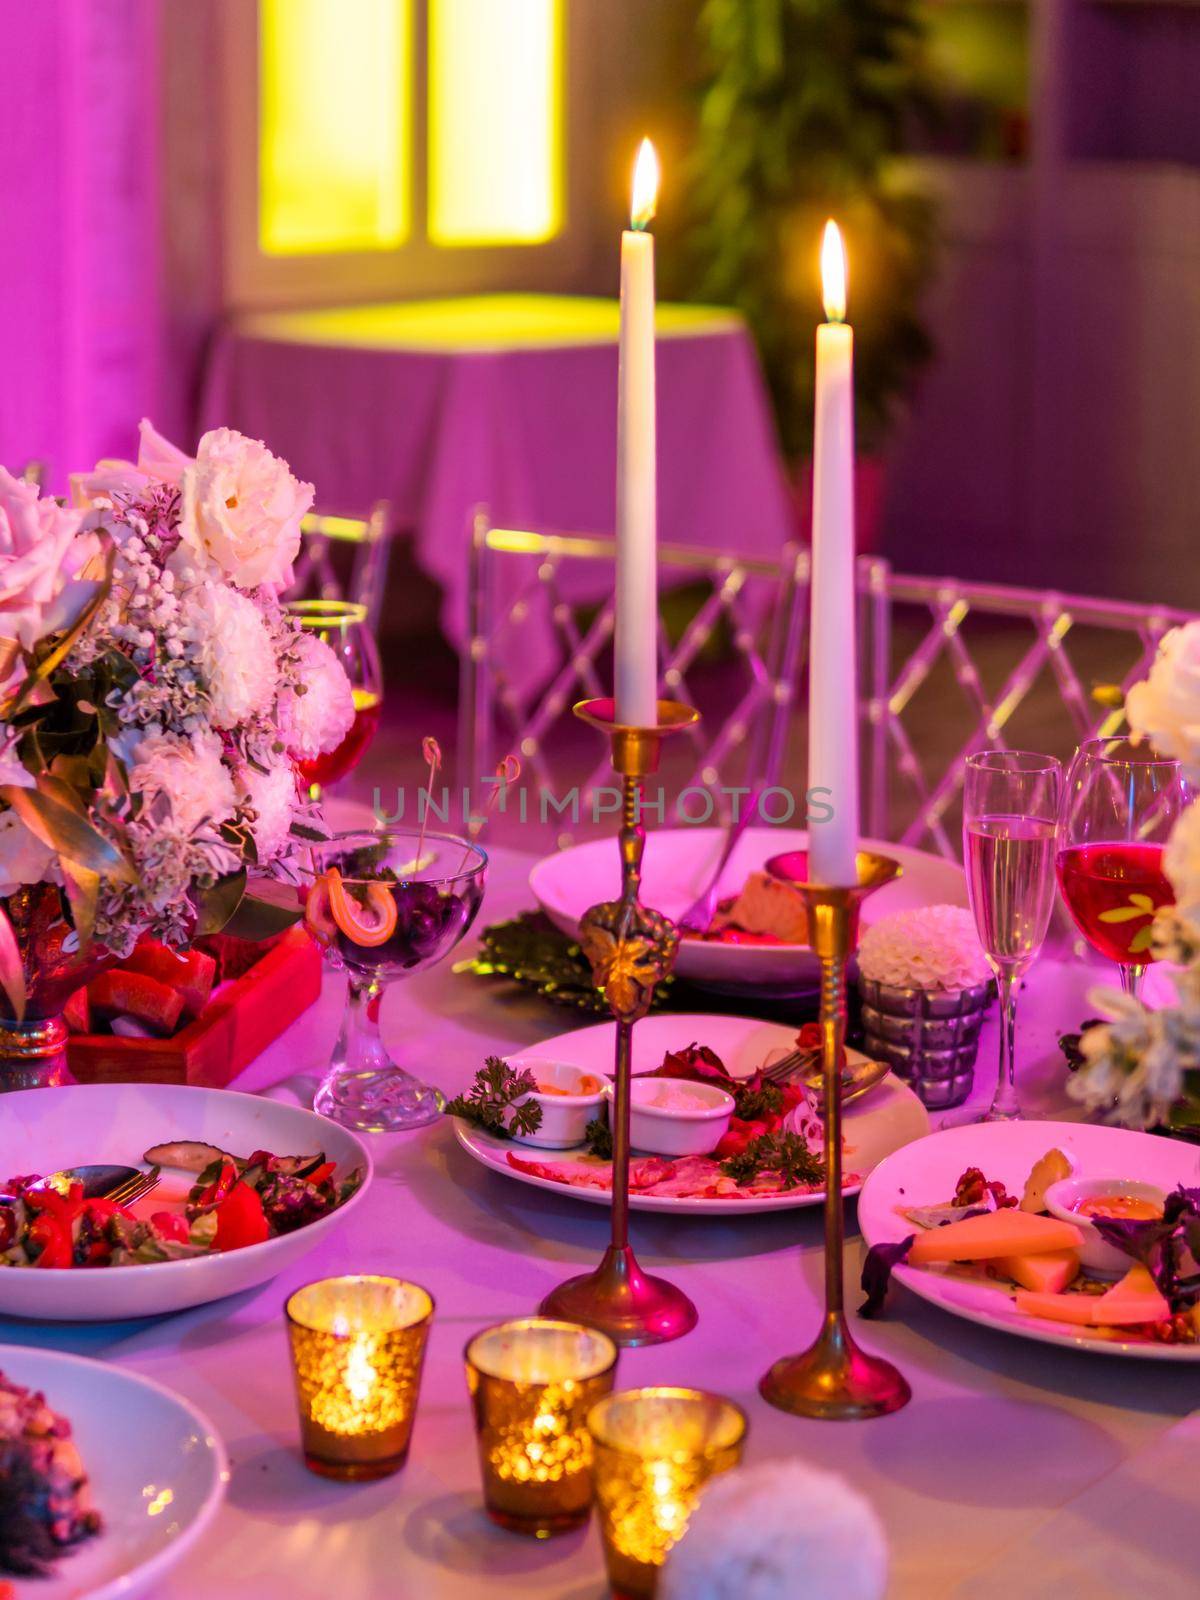 Table served for banquet or romantic date with candles and floral compositions. Beautiful decorations in pink electric light. by aksenovko